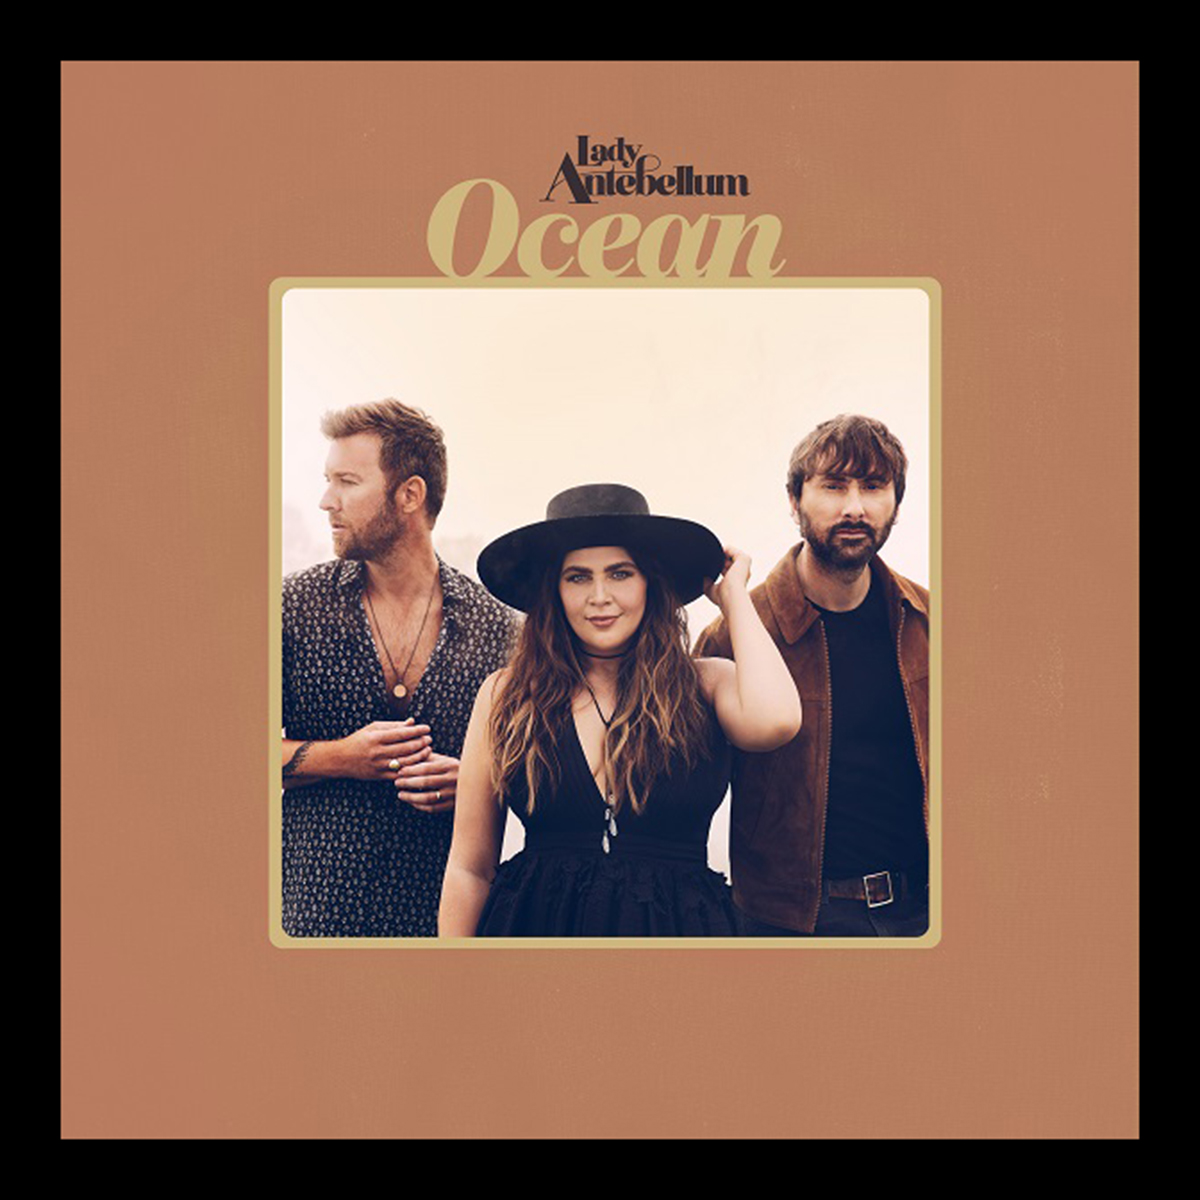 Lady Antebellum Set Sail For Ocean 2020 Tour Launching This May